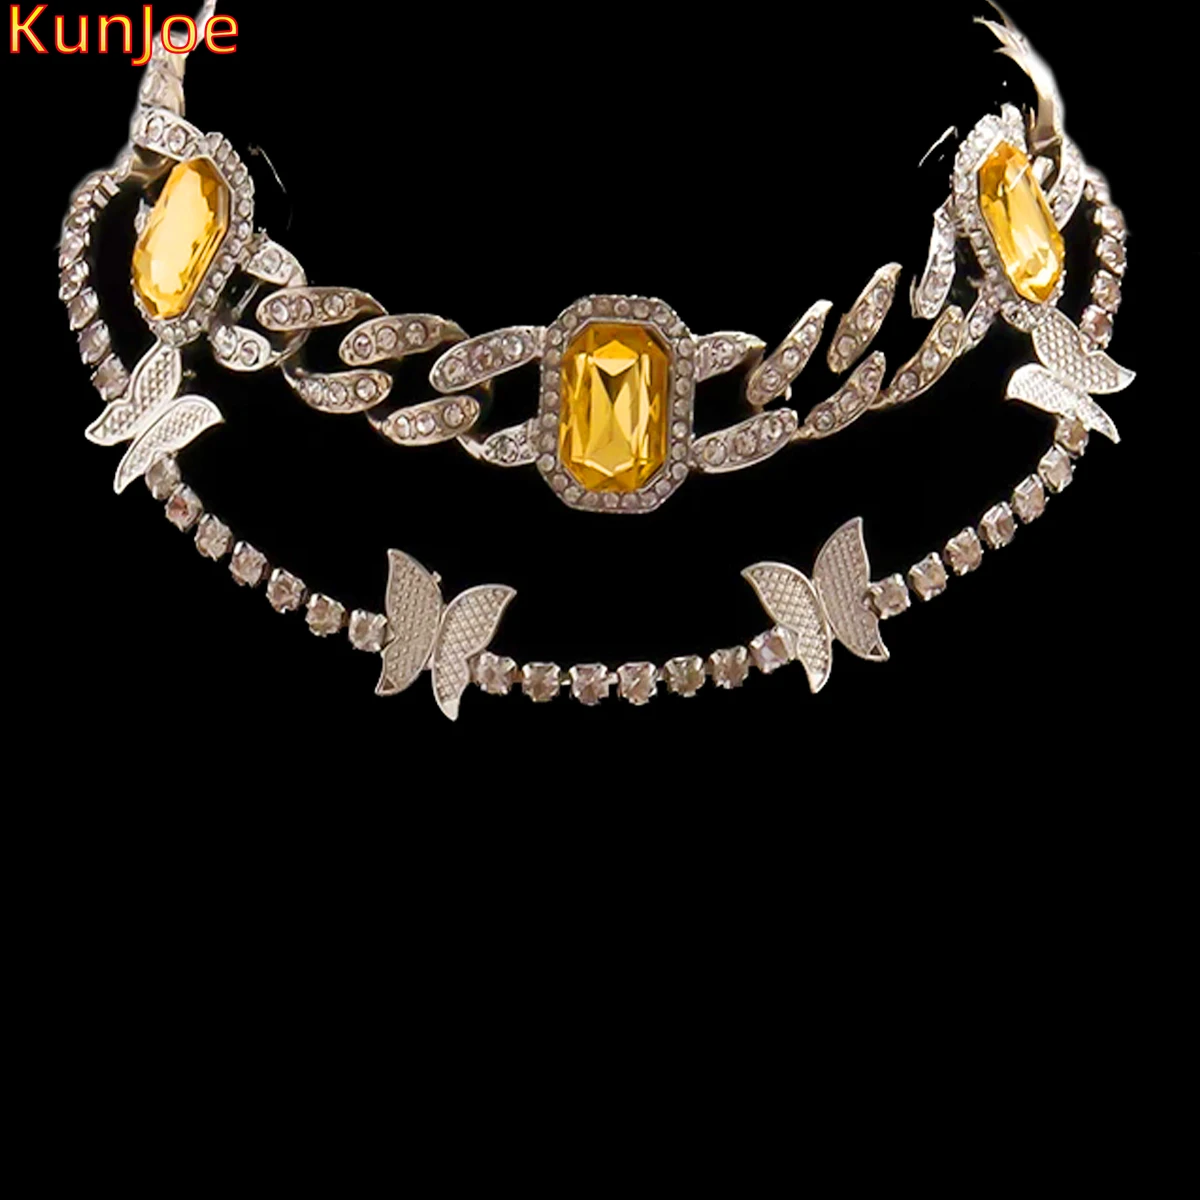 

KunJoe Hip Hop Iced Out Cuban Chain Necklace With Yellow Gem Crystal Butterfly Pendant Tennis Chain Rapper Choker Women Jewelry